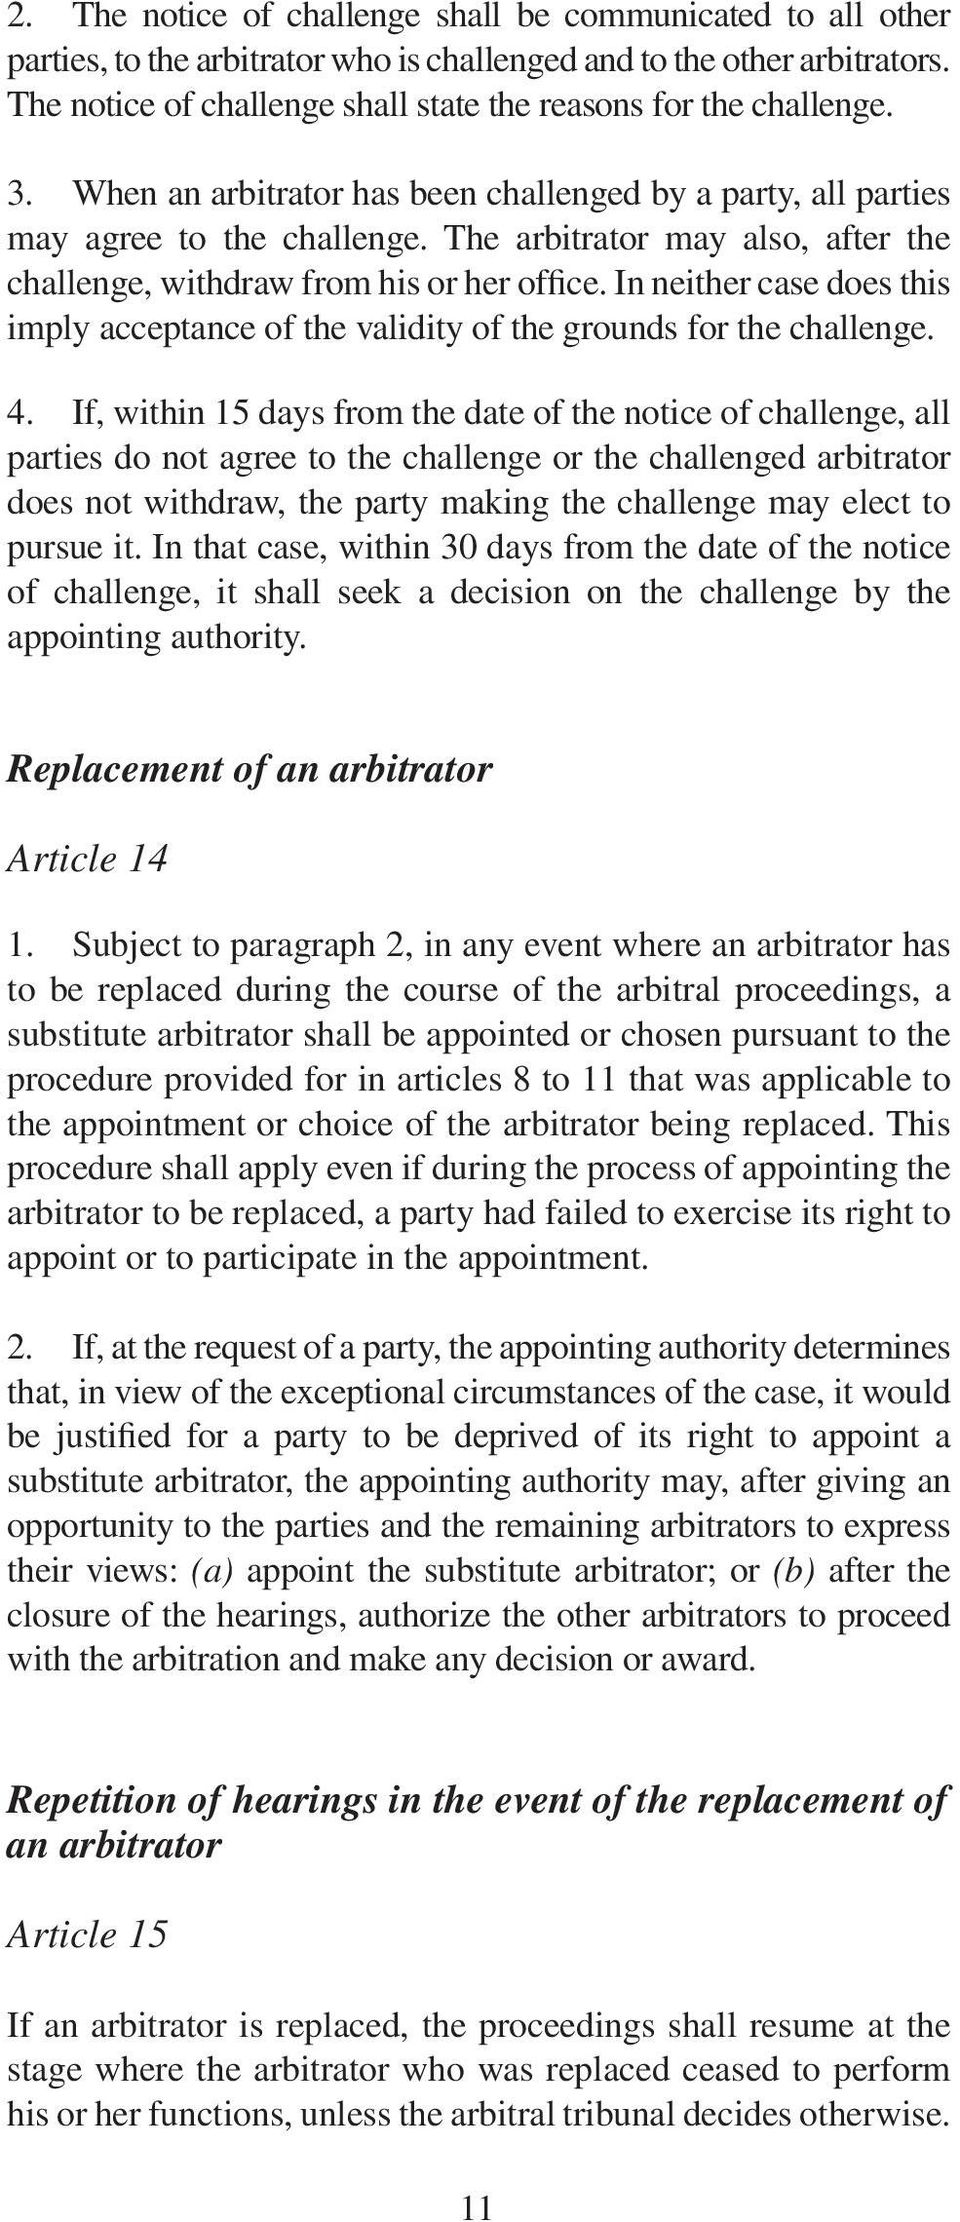 The arbitrator may also, after the challenge, withdraw from his or her office. In neither case does this imply acceptance of the validity of the grounds for the challenge. 4.